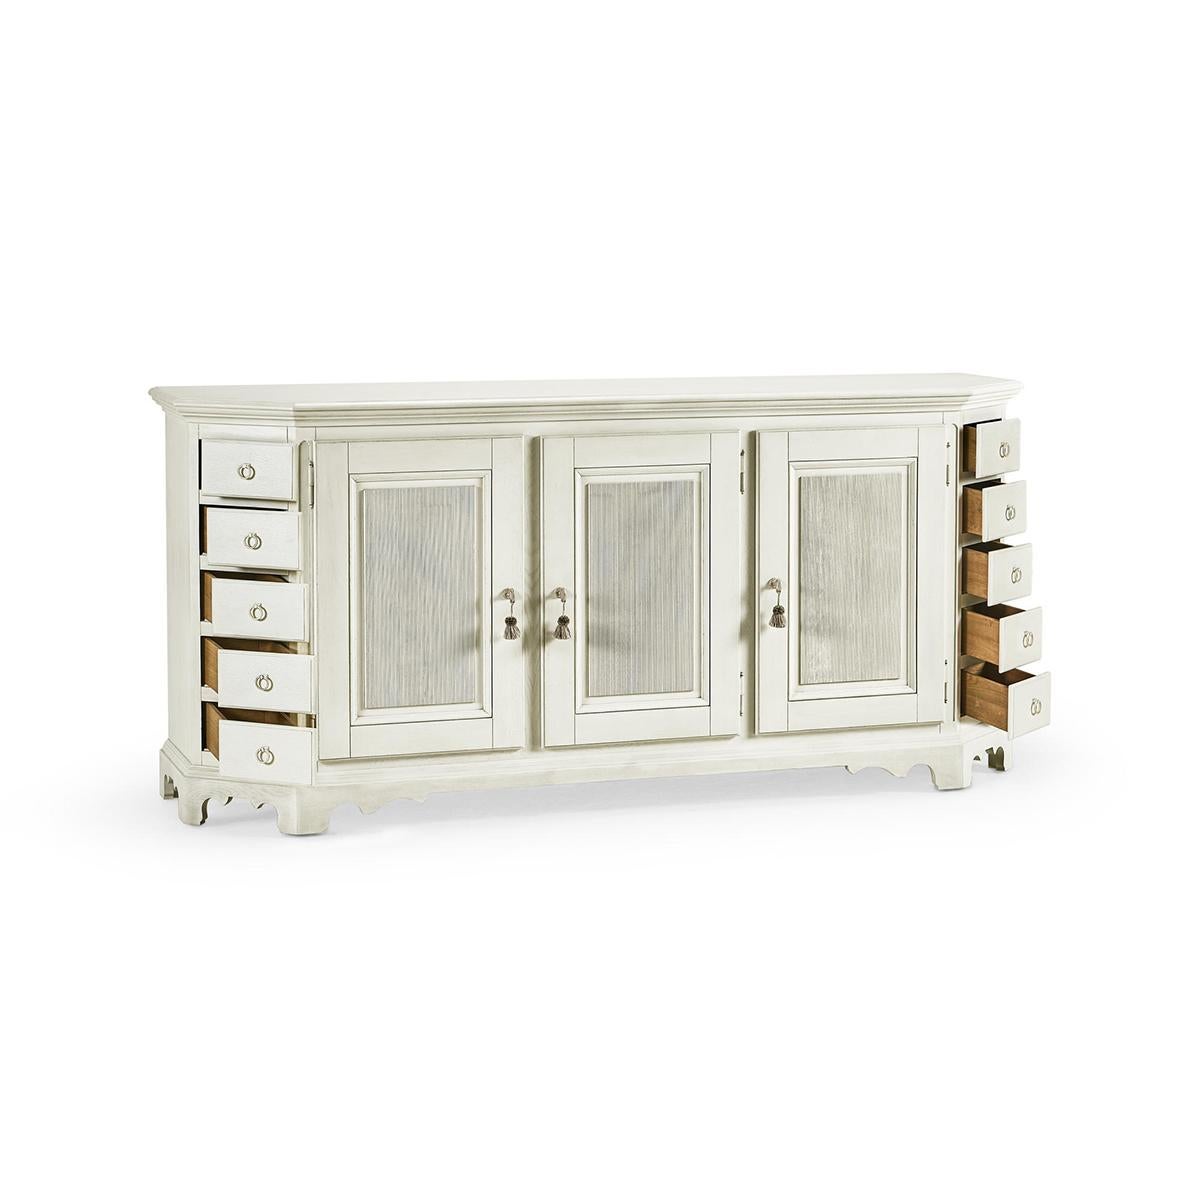 French Provincial White Provincial Buffet Sideboard For Sale